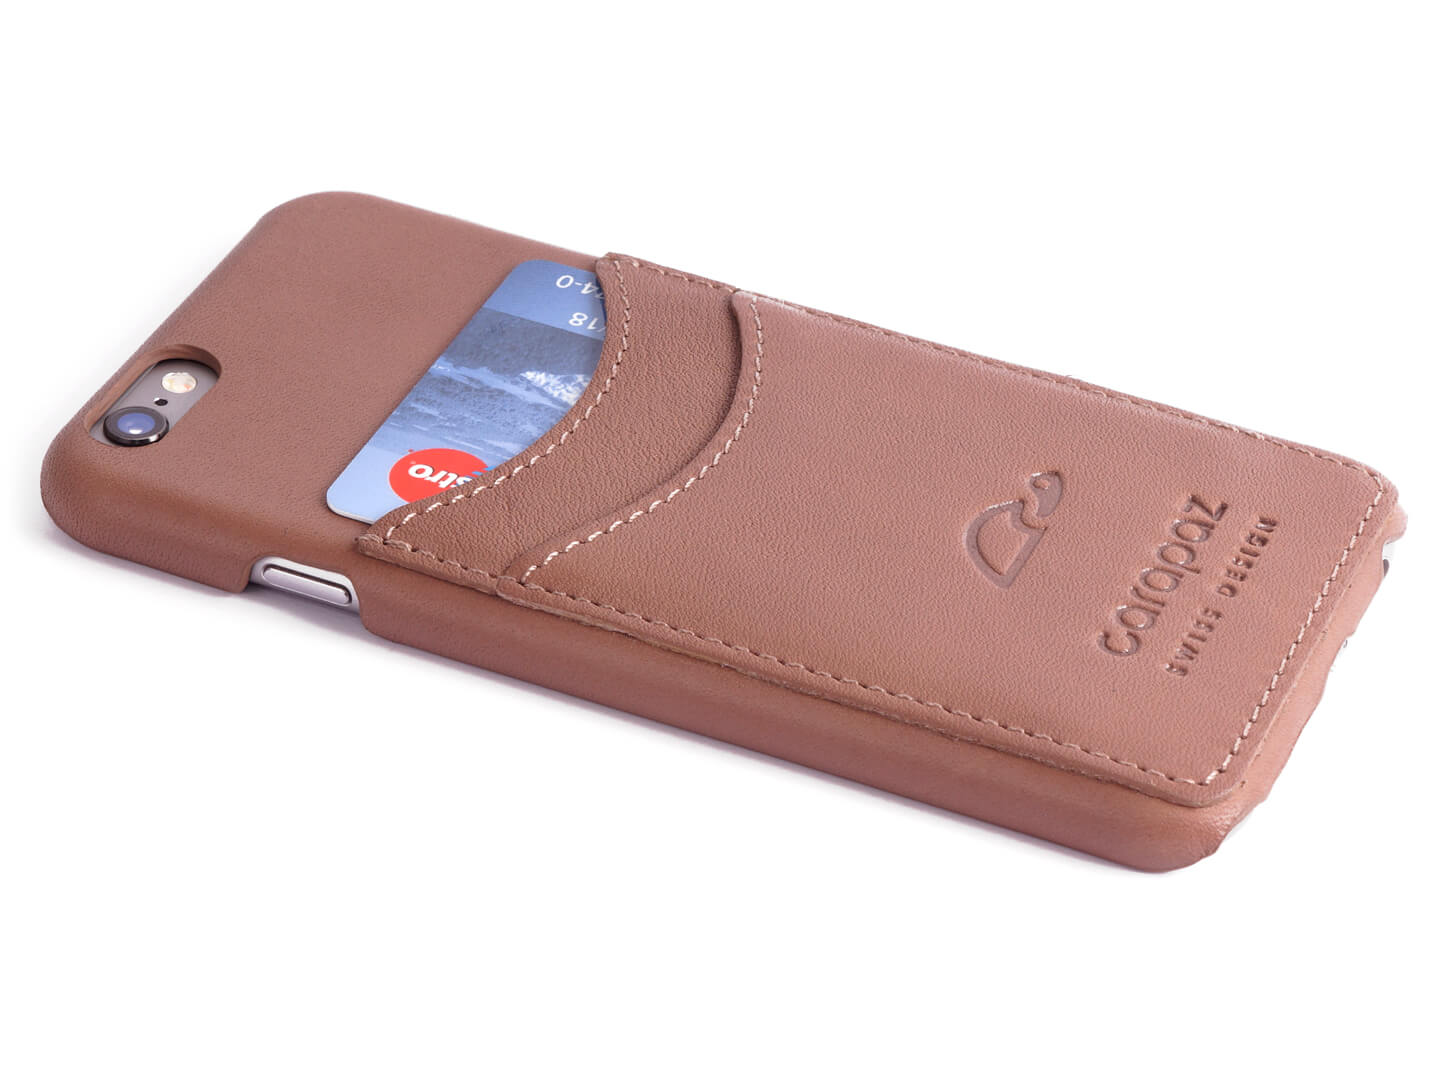 Leather cover iPhone 6 with credit cards pockets - rosy brown - Carapaz